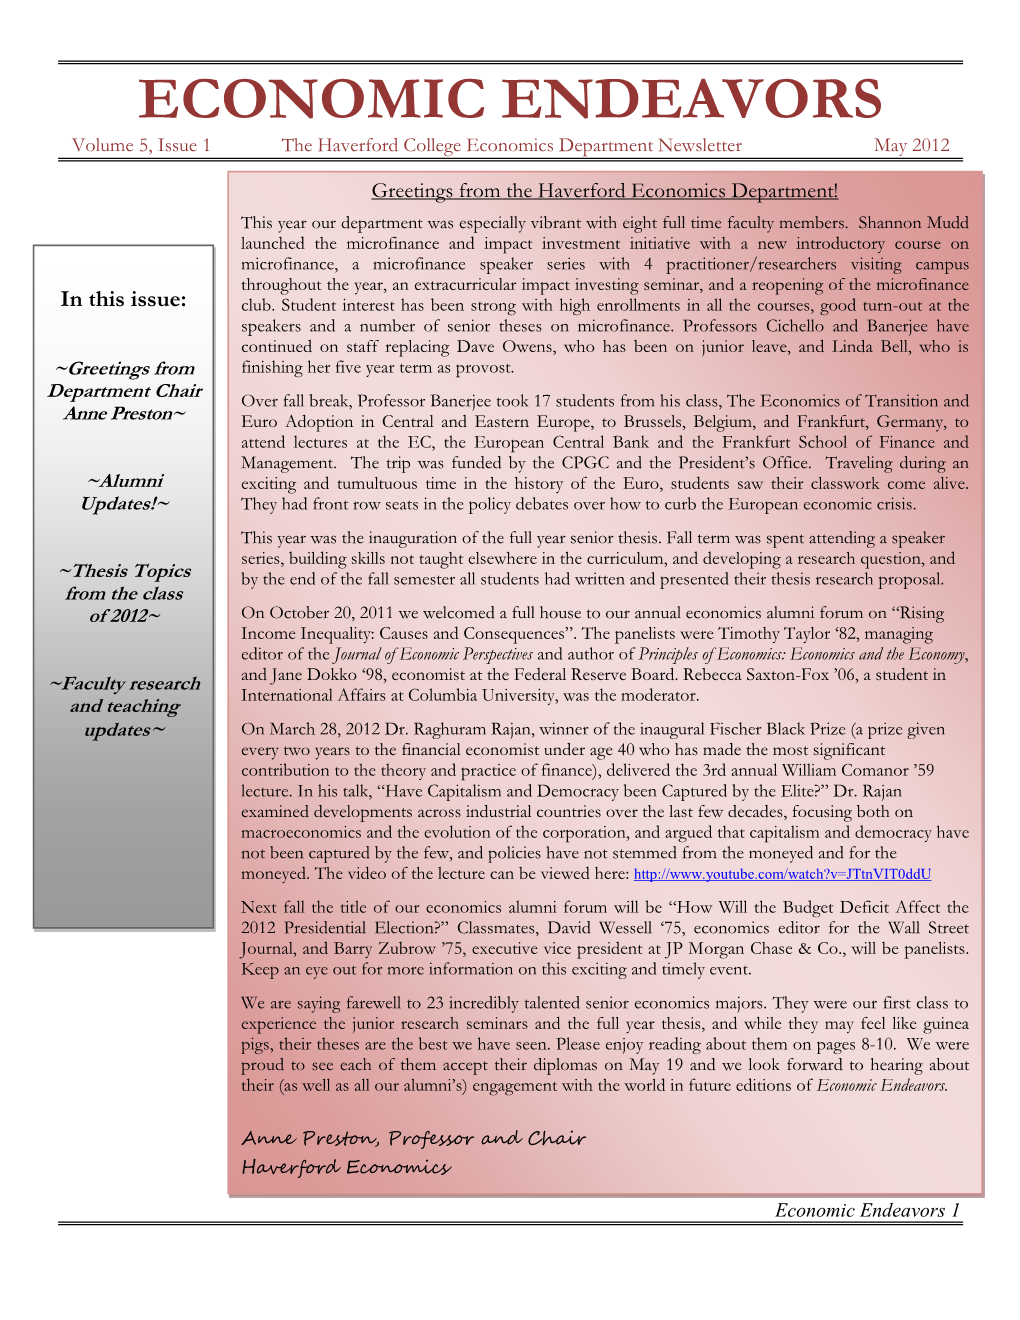 ECONOMIC ENDEAVORS Volume 5, Issue 1 the Haverford College Economics Department Newsletter May 2012